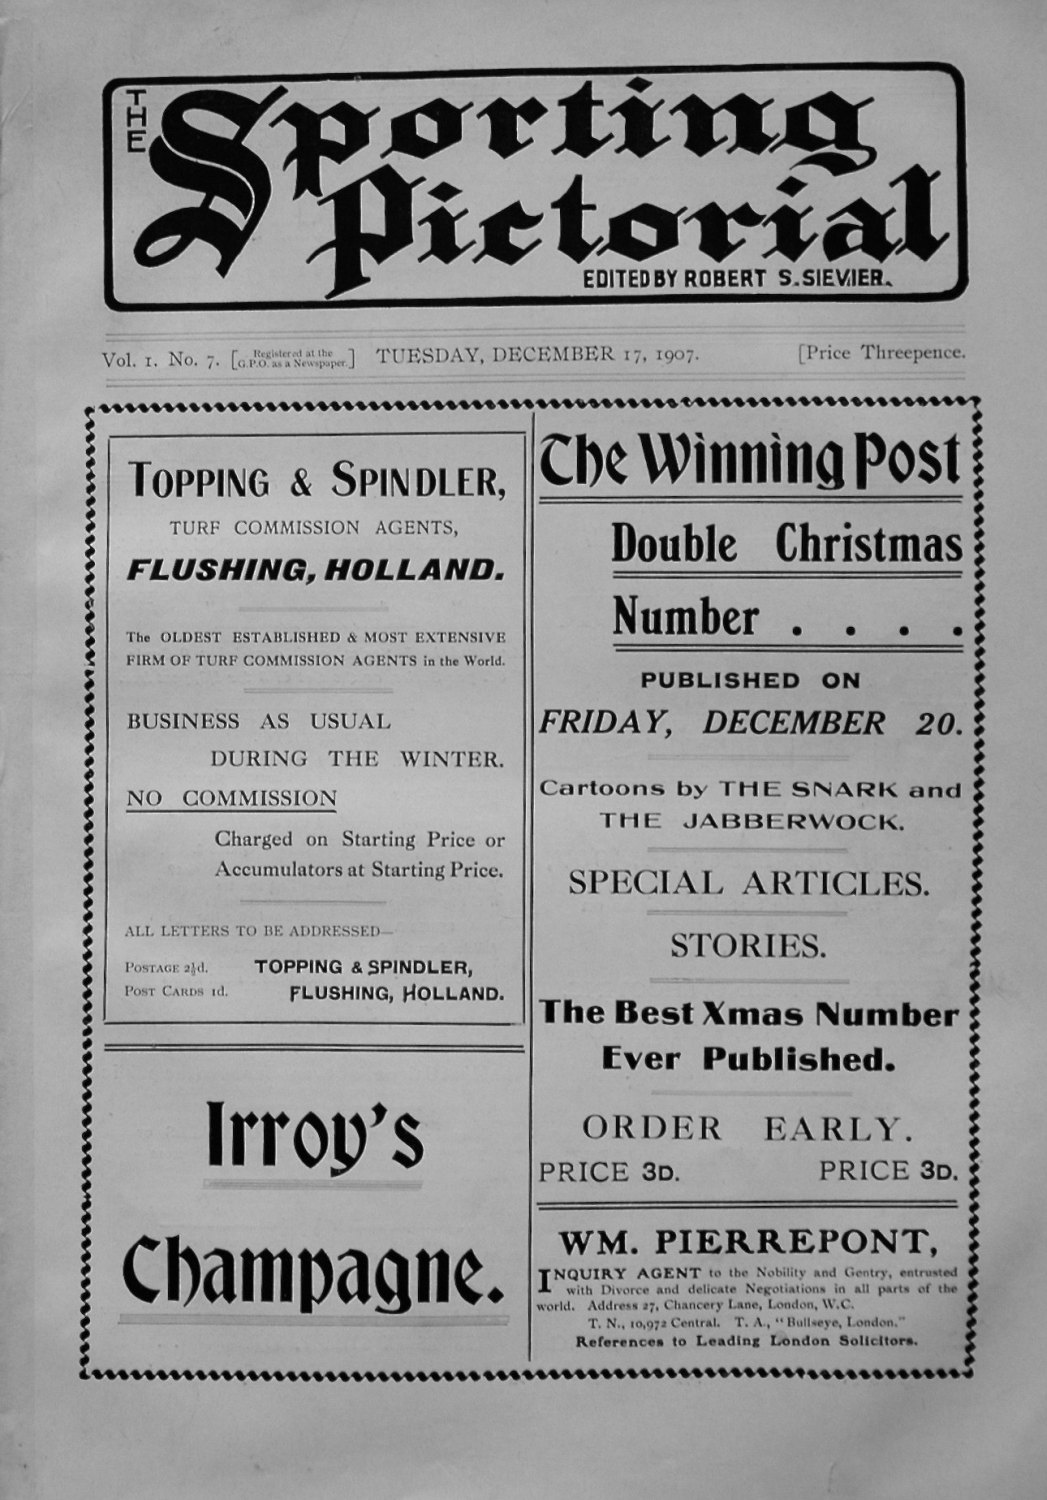 Sporting Pictorial. No. 7. December 17th 1907. 